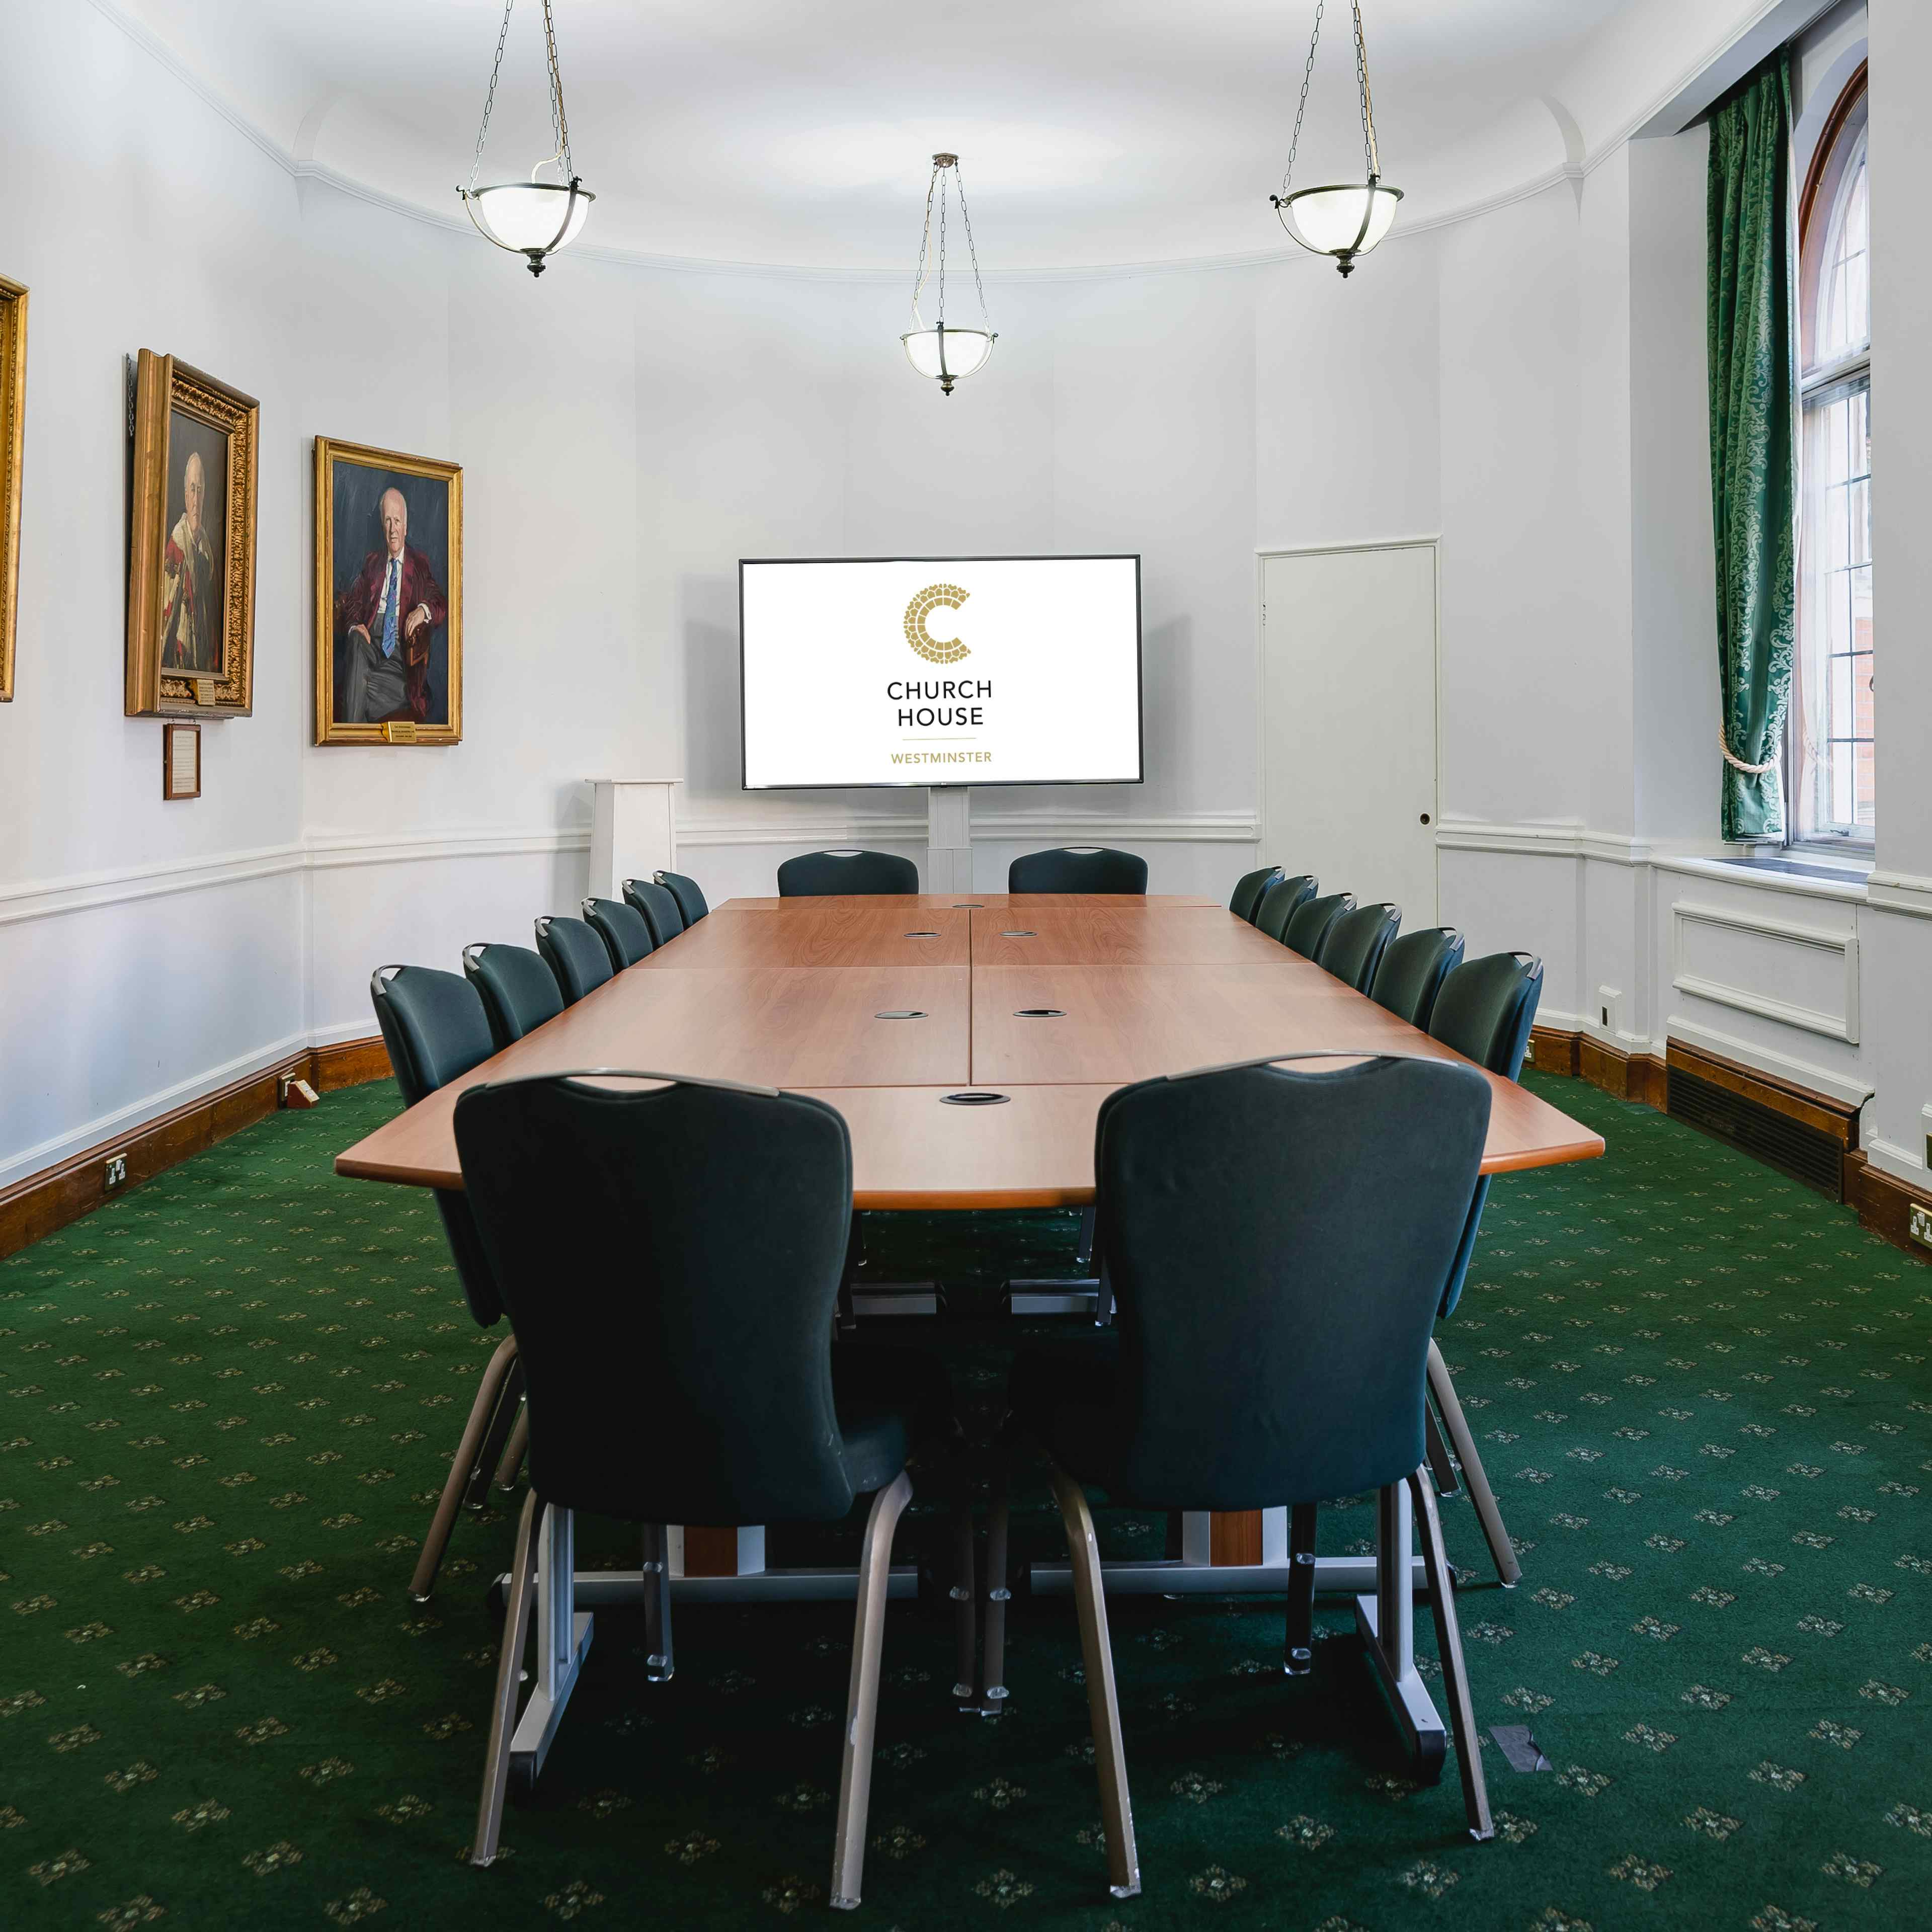 Church House Westminster - Council Room image 1